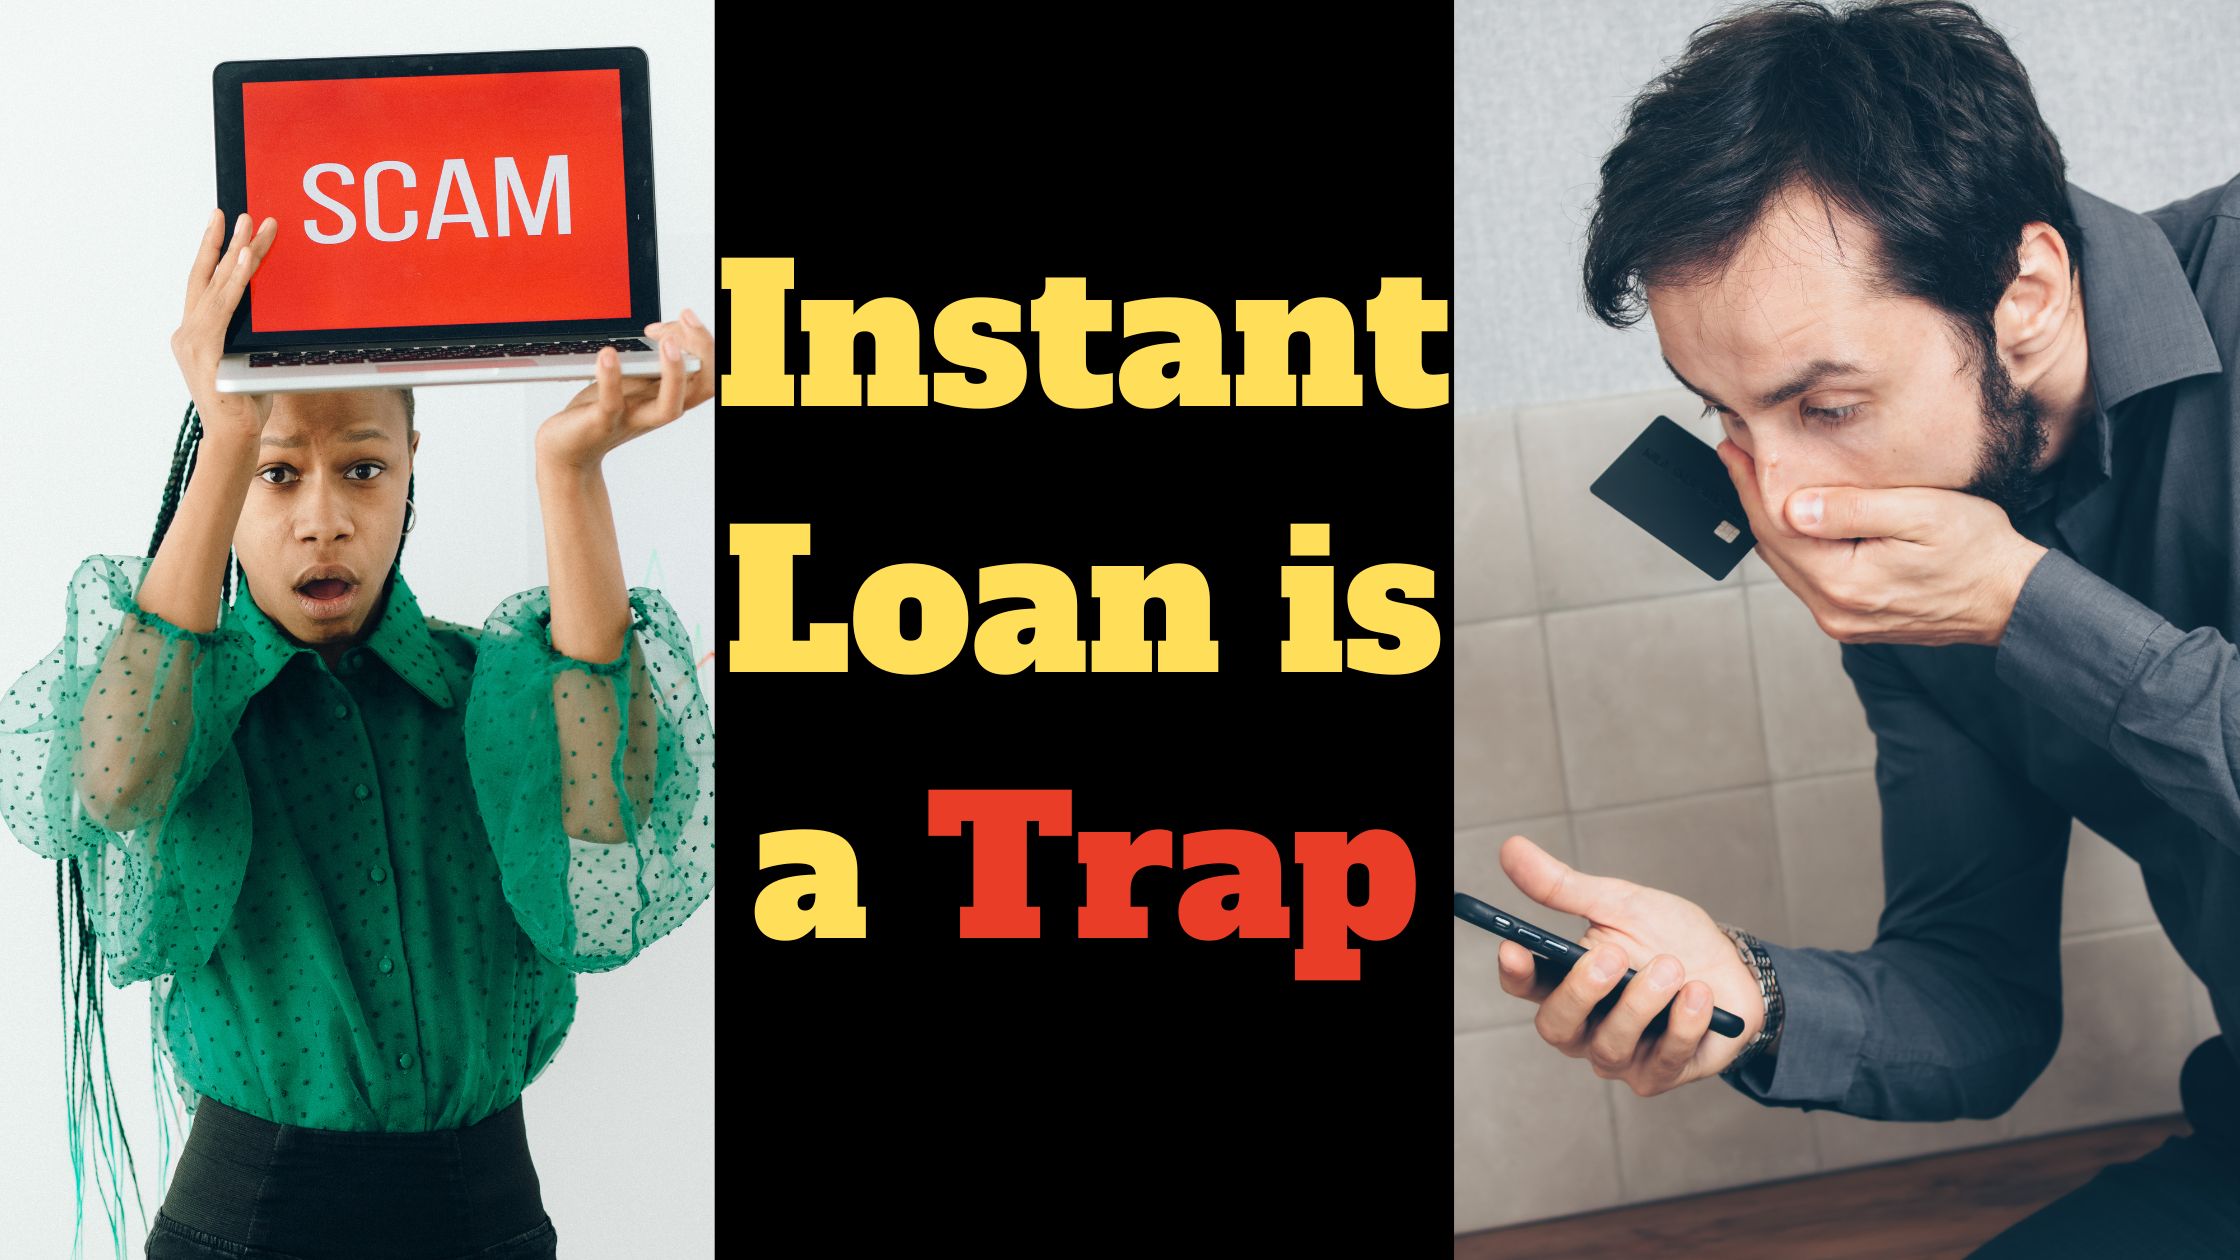 Instant Loan is a Trap